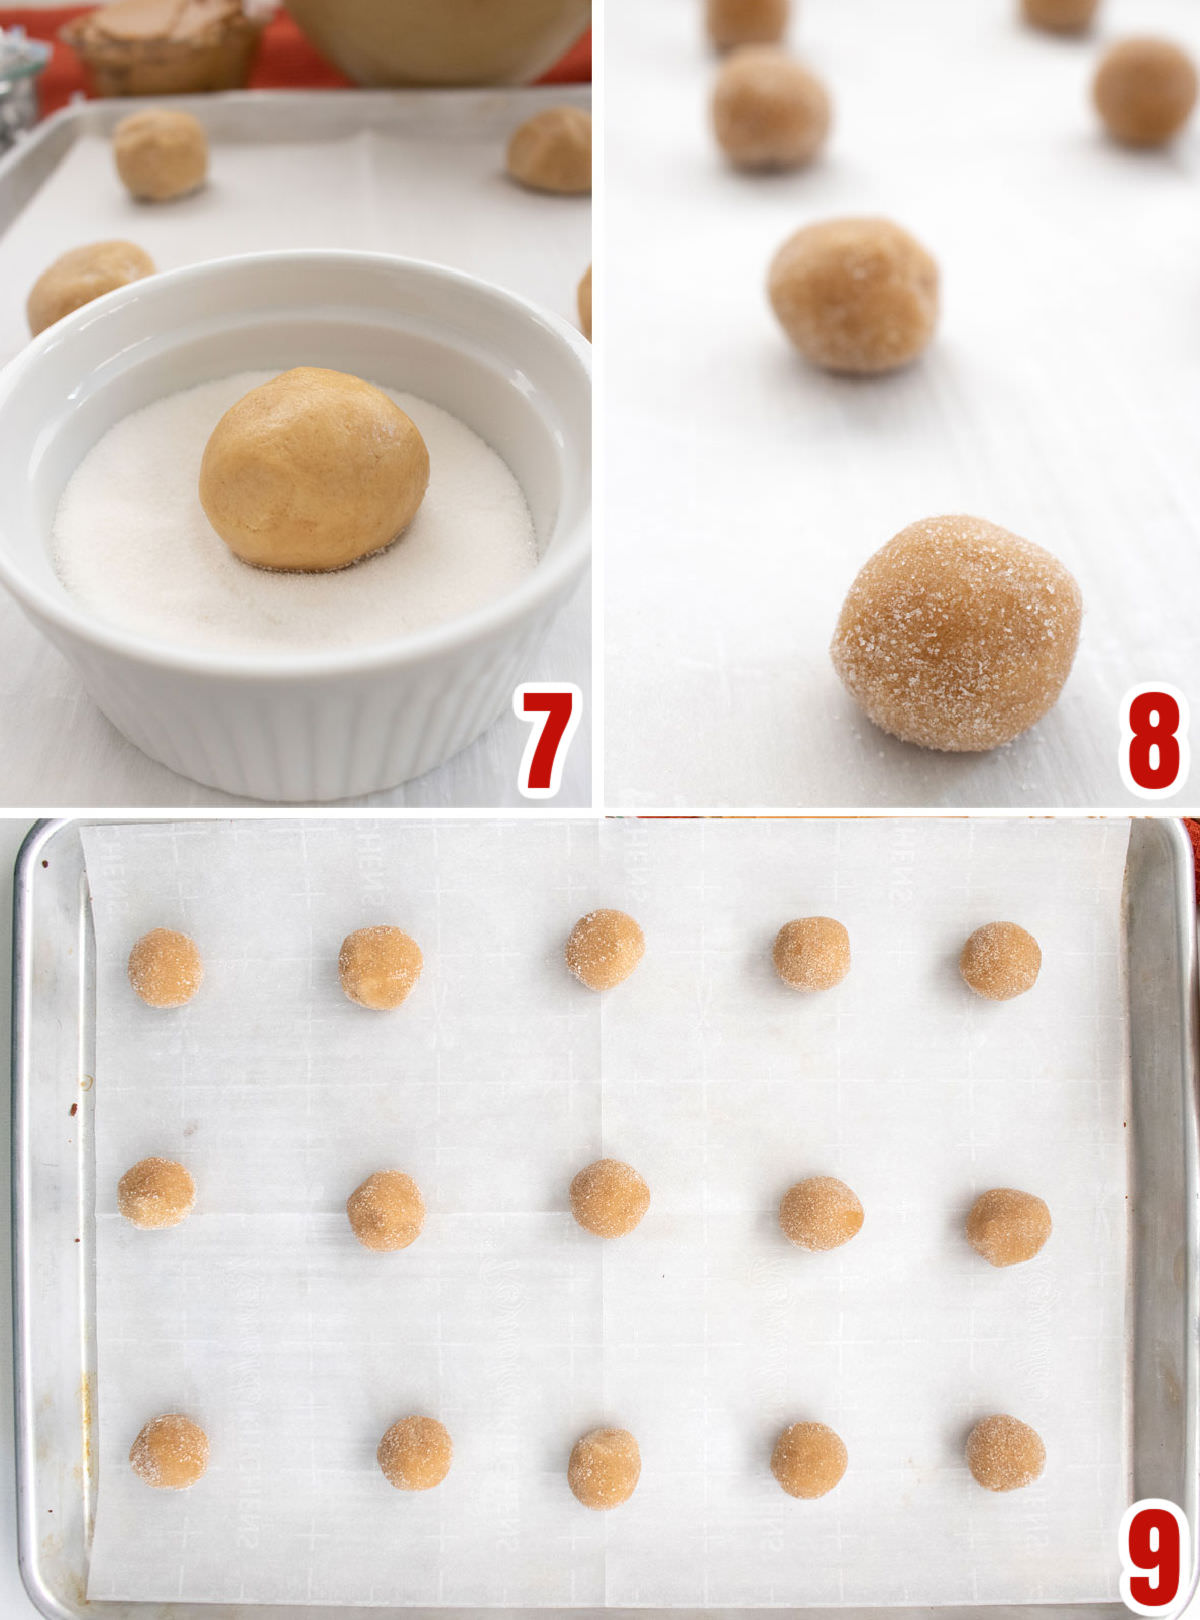 Collage image showing the steps for preparing the peanut butter cookie dough to be baked.